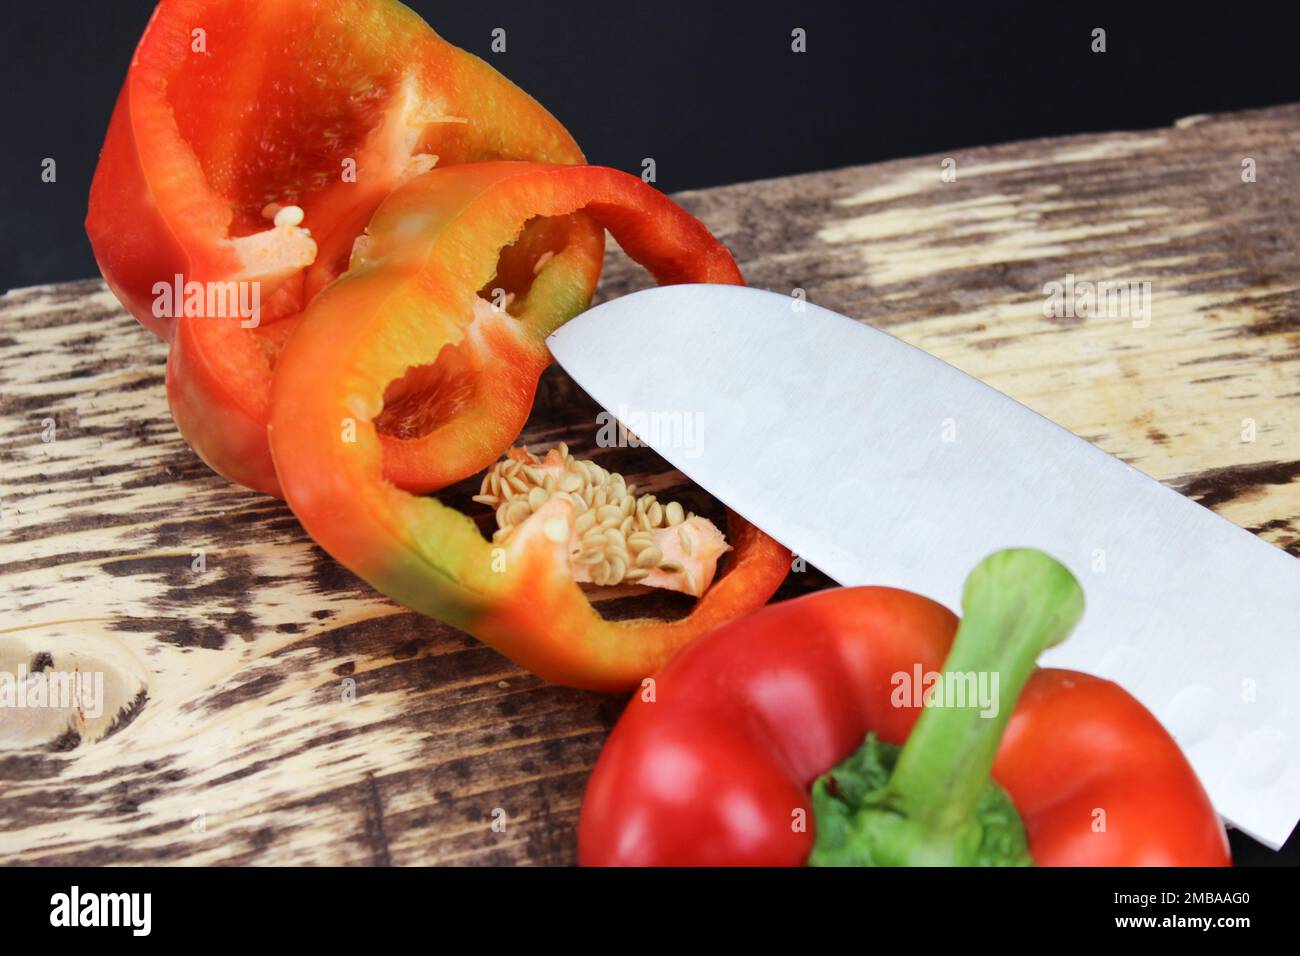 A pepper cut into two halves with a sharp knife. Knife lay next to cuttable pepper Stock Photo